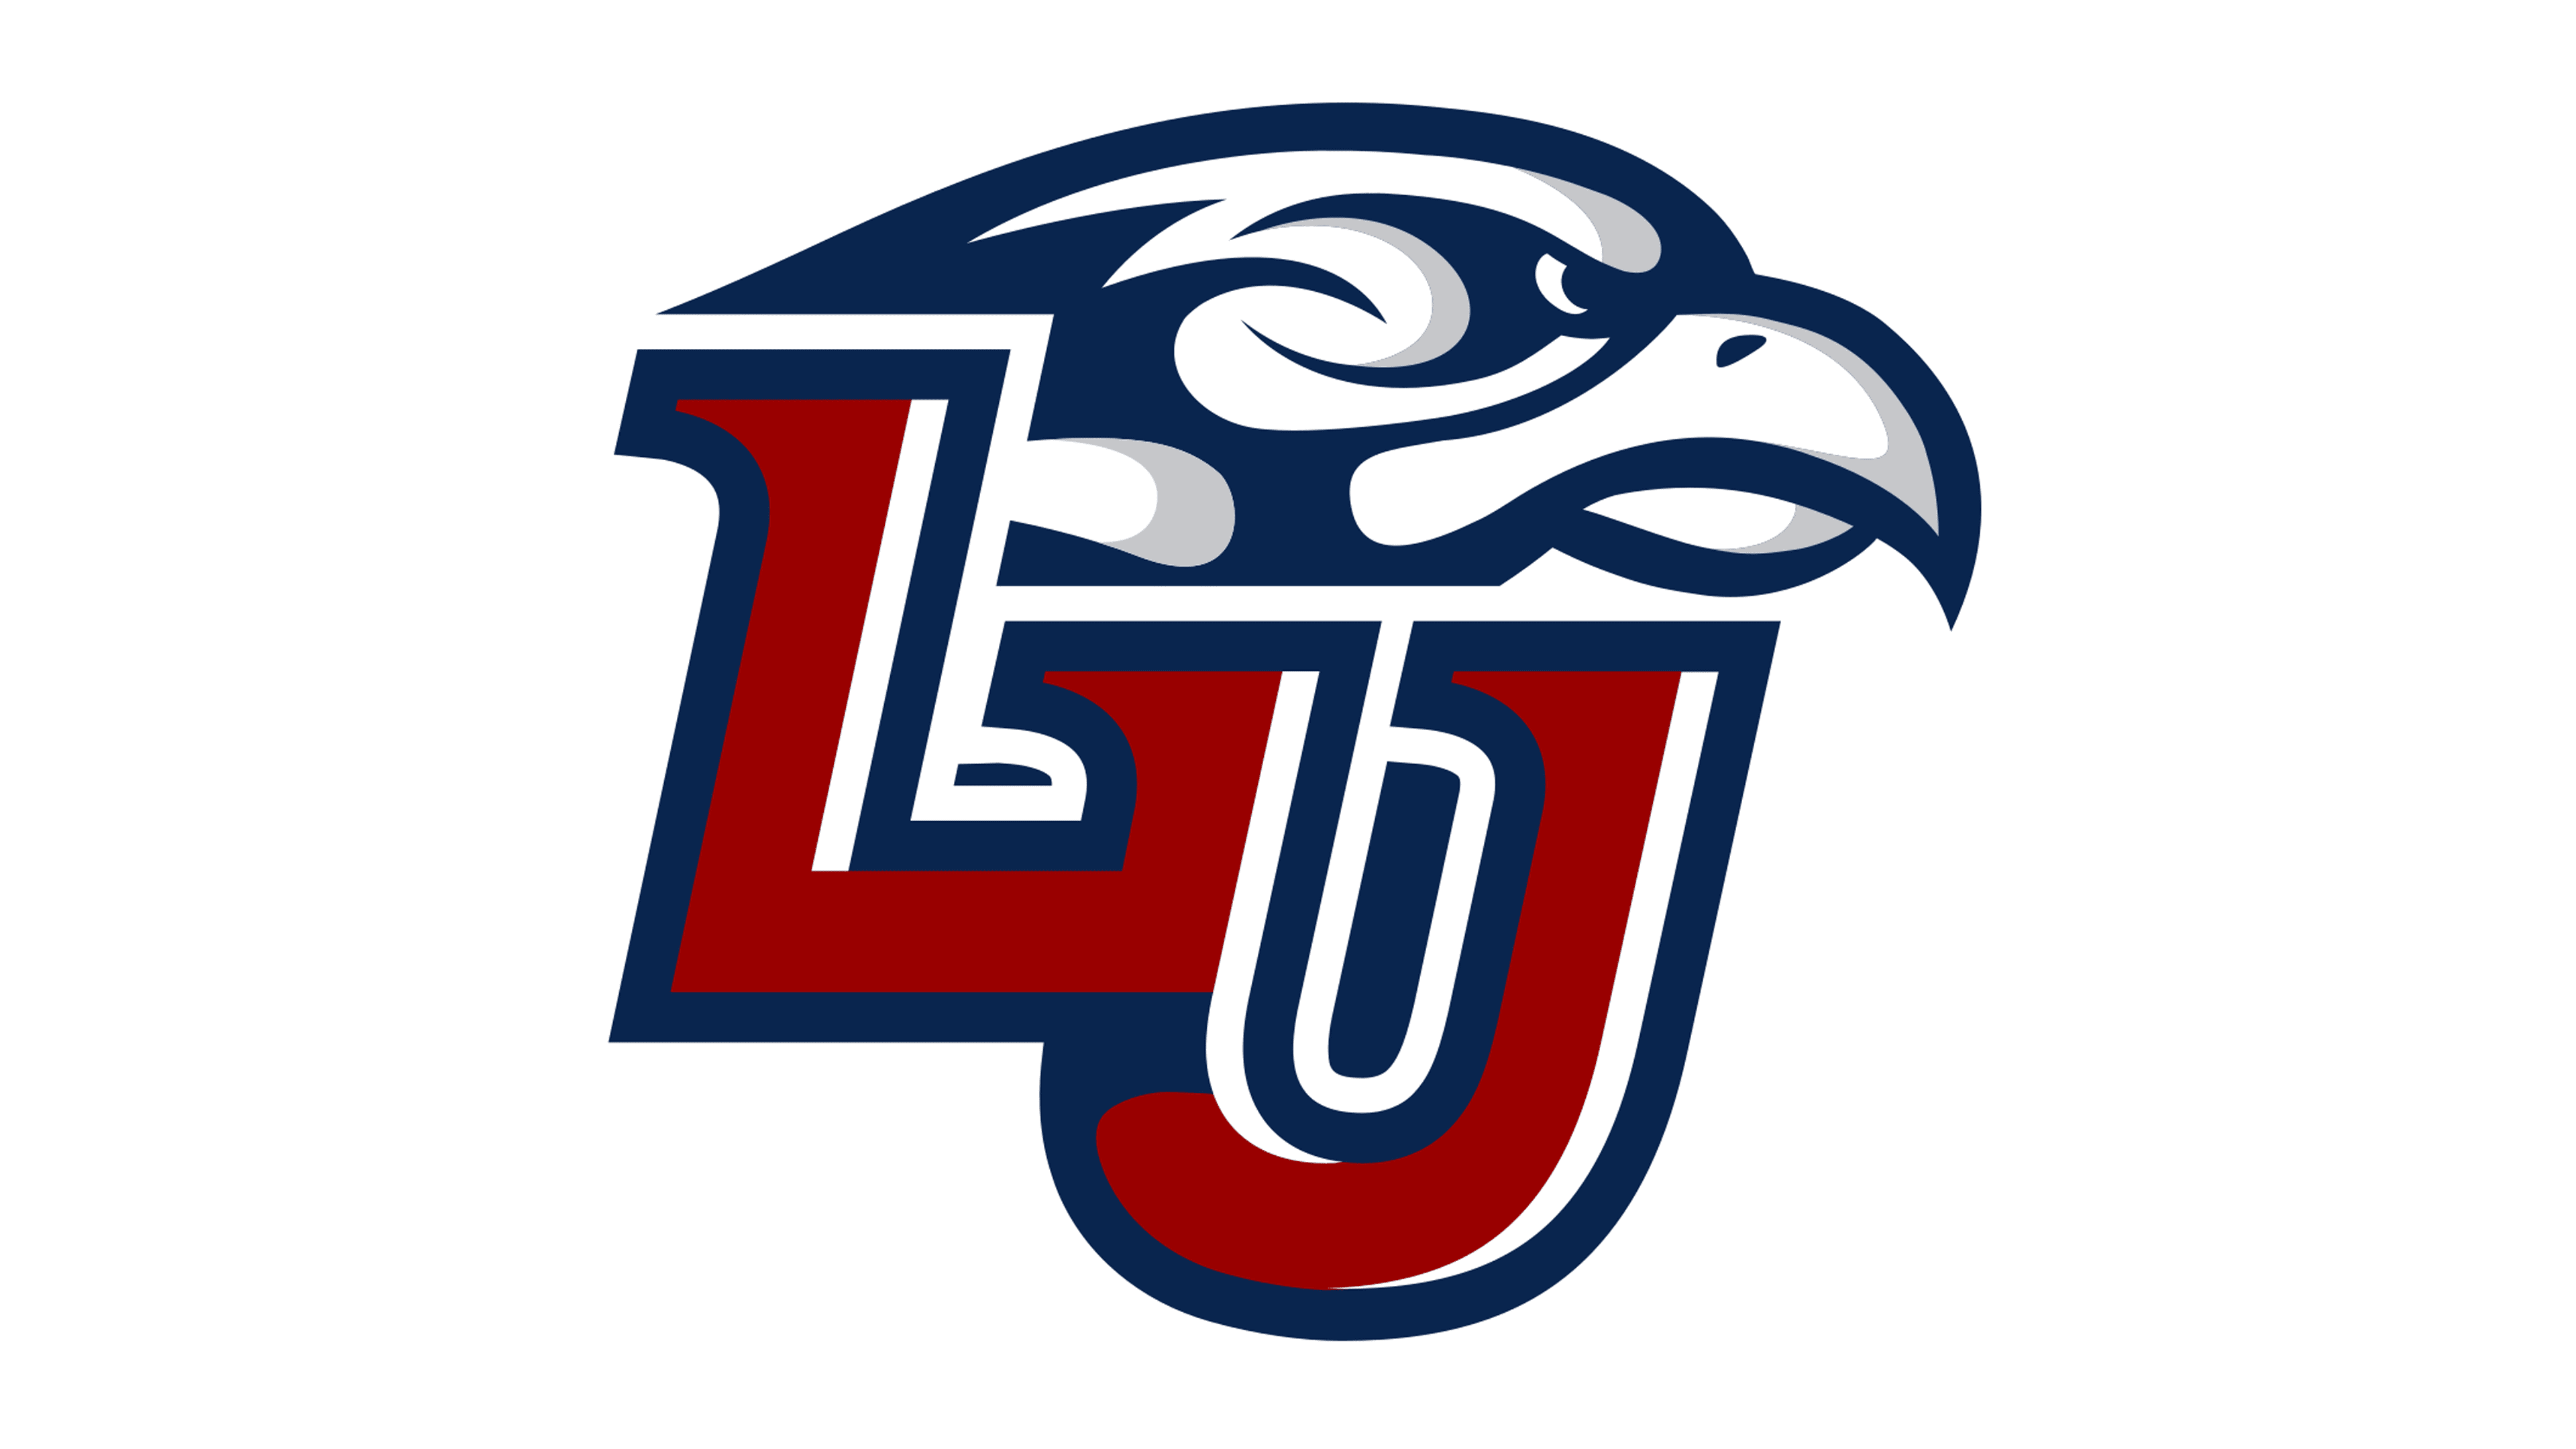 Liberty Flames logo and symbol, meaning, history, PNG